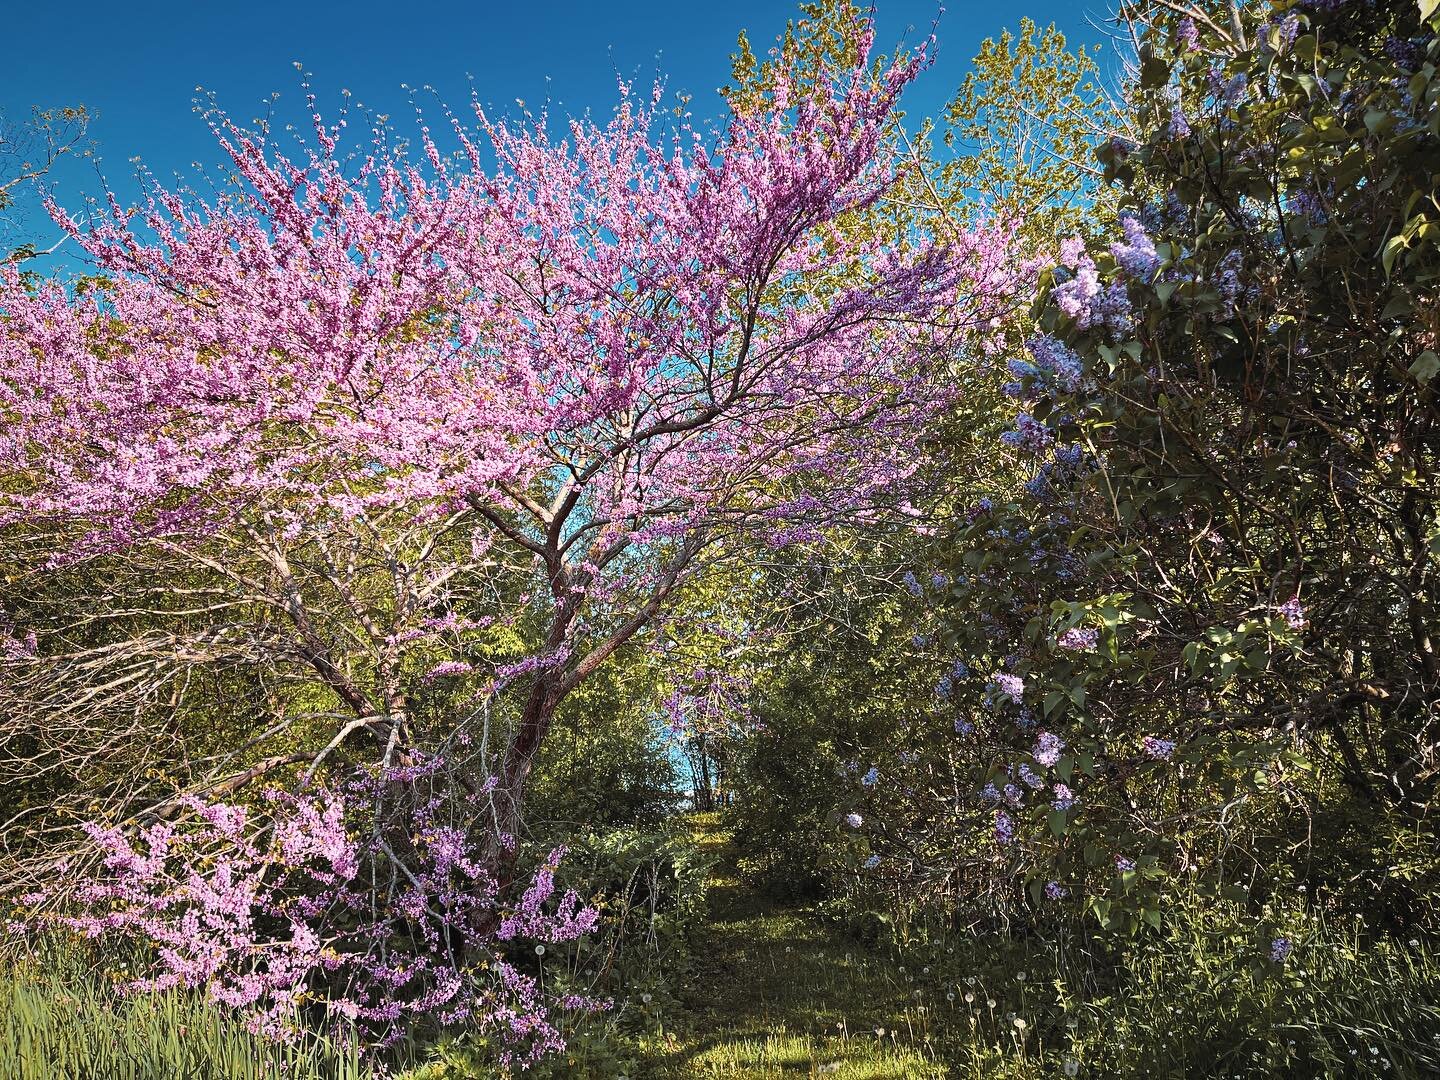 / REDBUD /
.
Soon we will be seeing the frothy pink/purple flowers of the Eastern Redbud (Cercis canadensis). It is one of the earlier spring flowering shrubs and has lovely bright and clean green-blue foliage that turns gorgeous gold in fall. Heart-